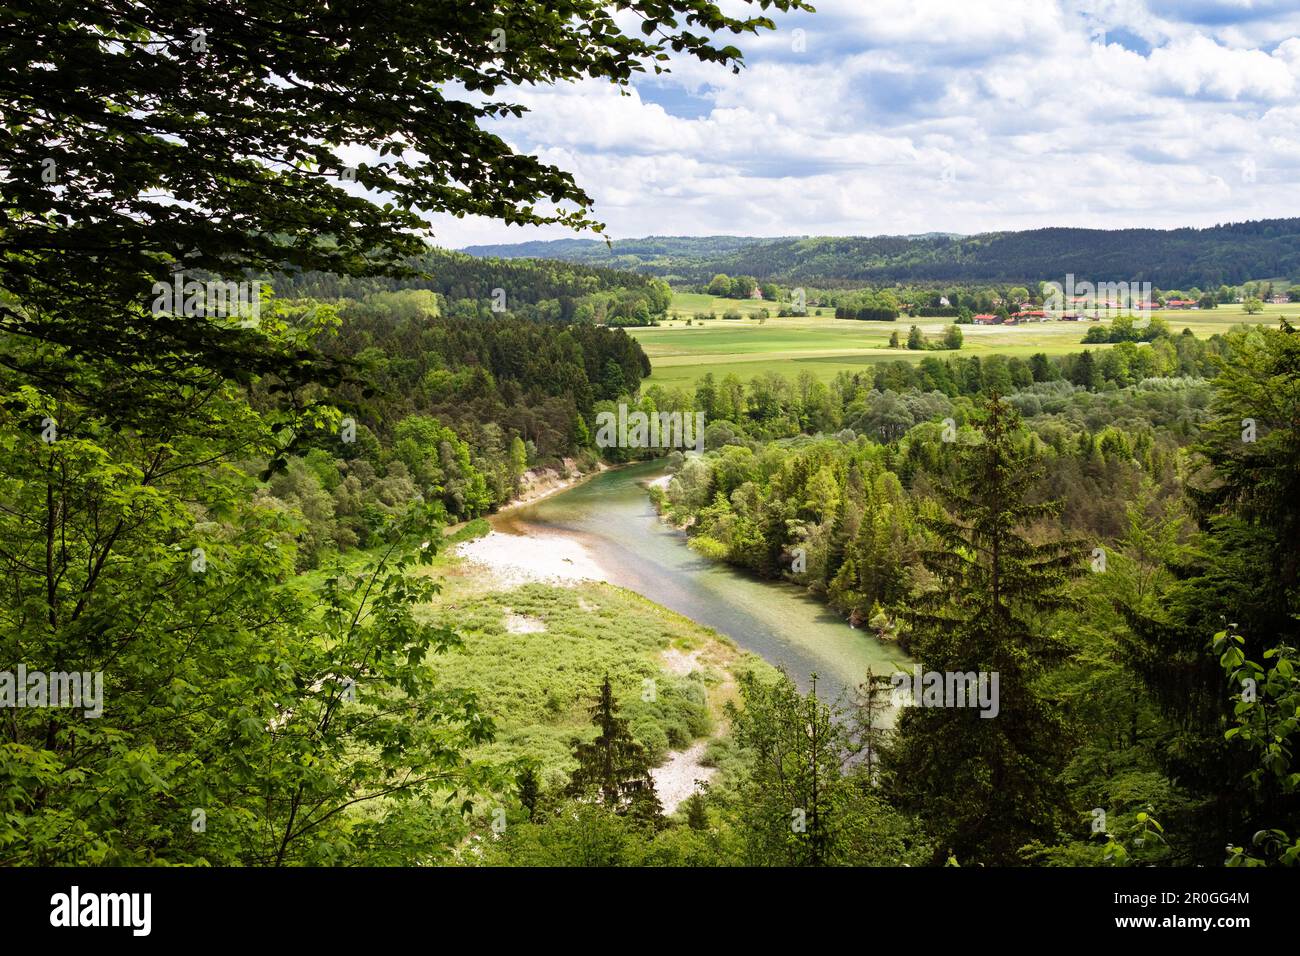 View over Isar river valley, Konigsdorf, Isar Cycle Route, Upper Bavaria, Germany Stock Photo